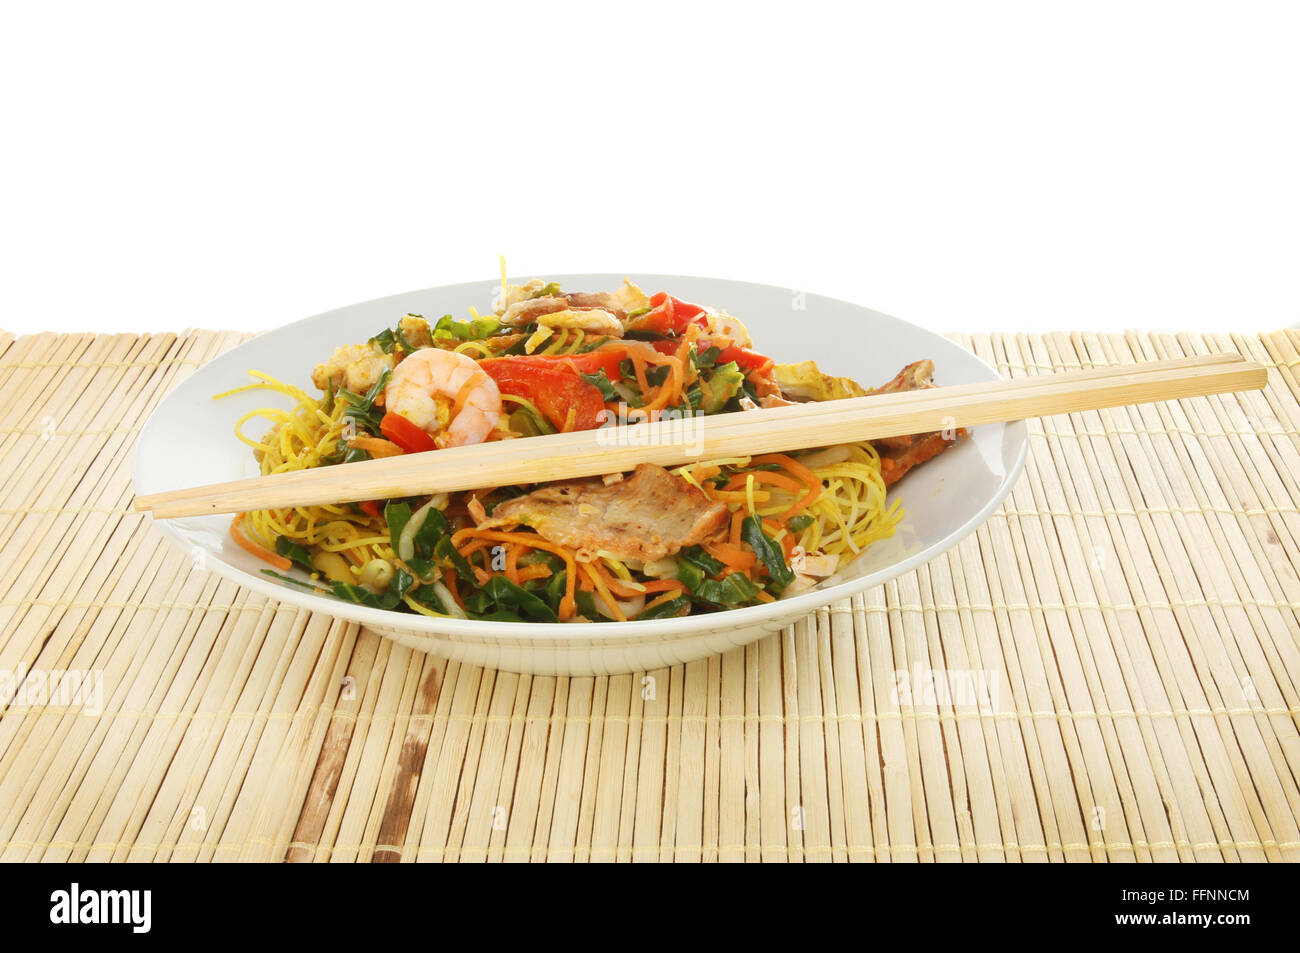 Chinese meal, Singapore noodles in a bowl with chopsticks on a bamboo matt Stock Photo